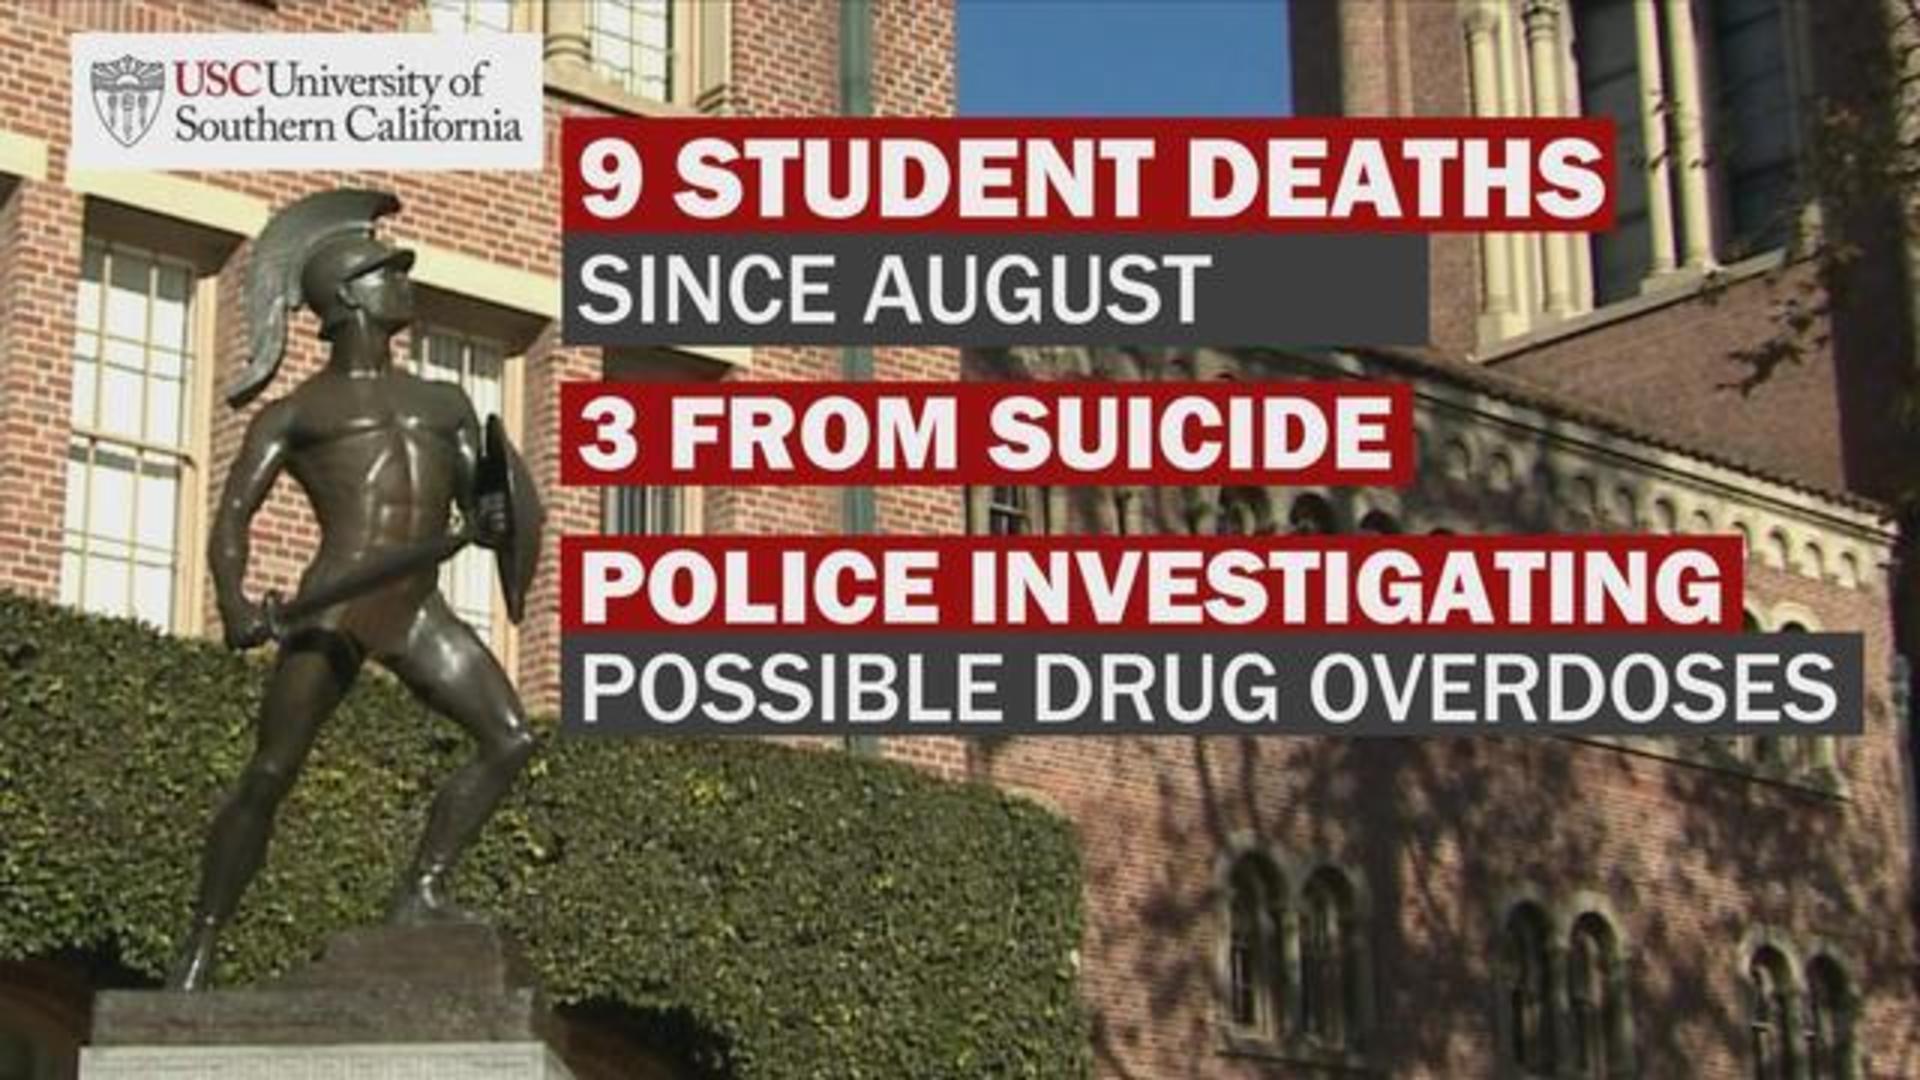 California authorities are investigating the death of a USC